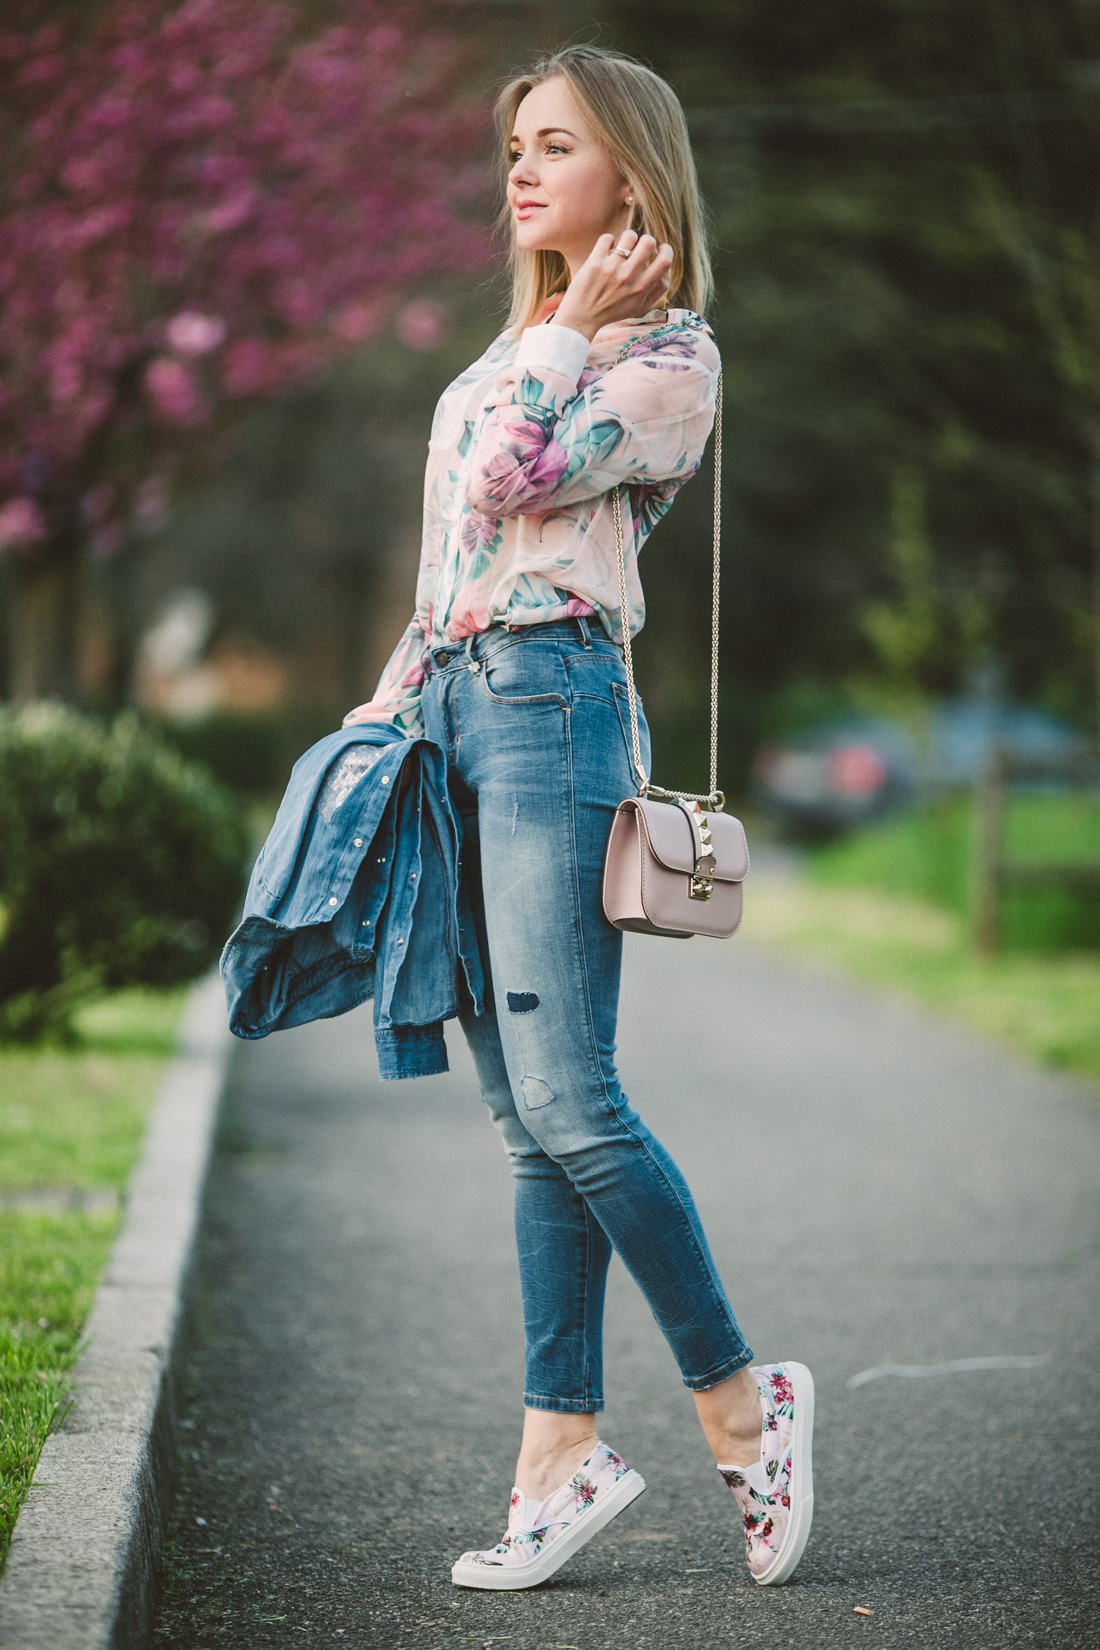 darya kamalova thecablook fashion lifestyle russian italian blogger wears total guess jeans myguess look with valentino rockstud glamrock cipria pale rose bag-4588